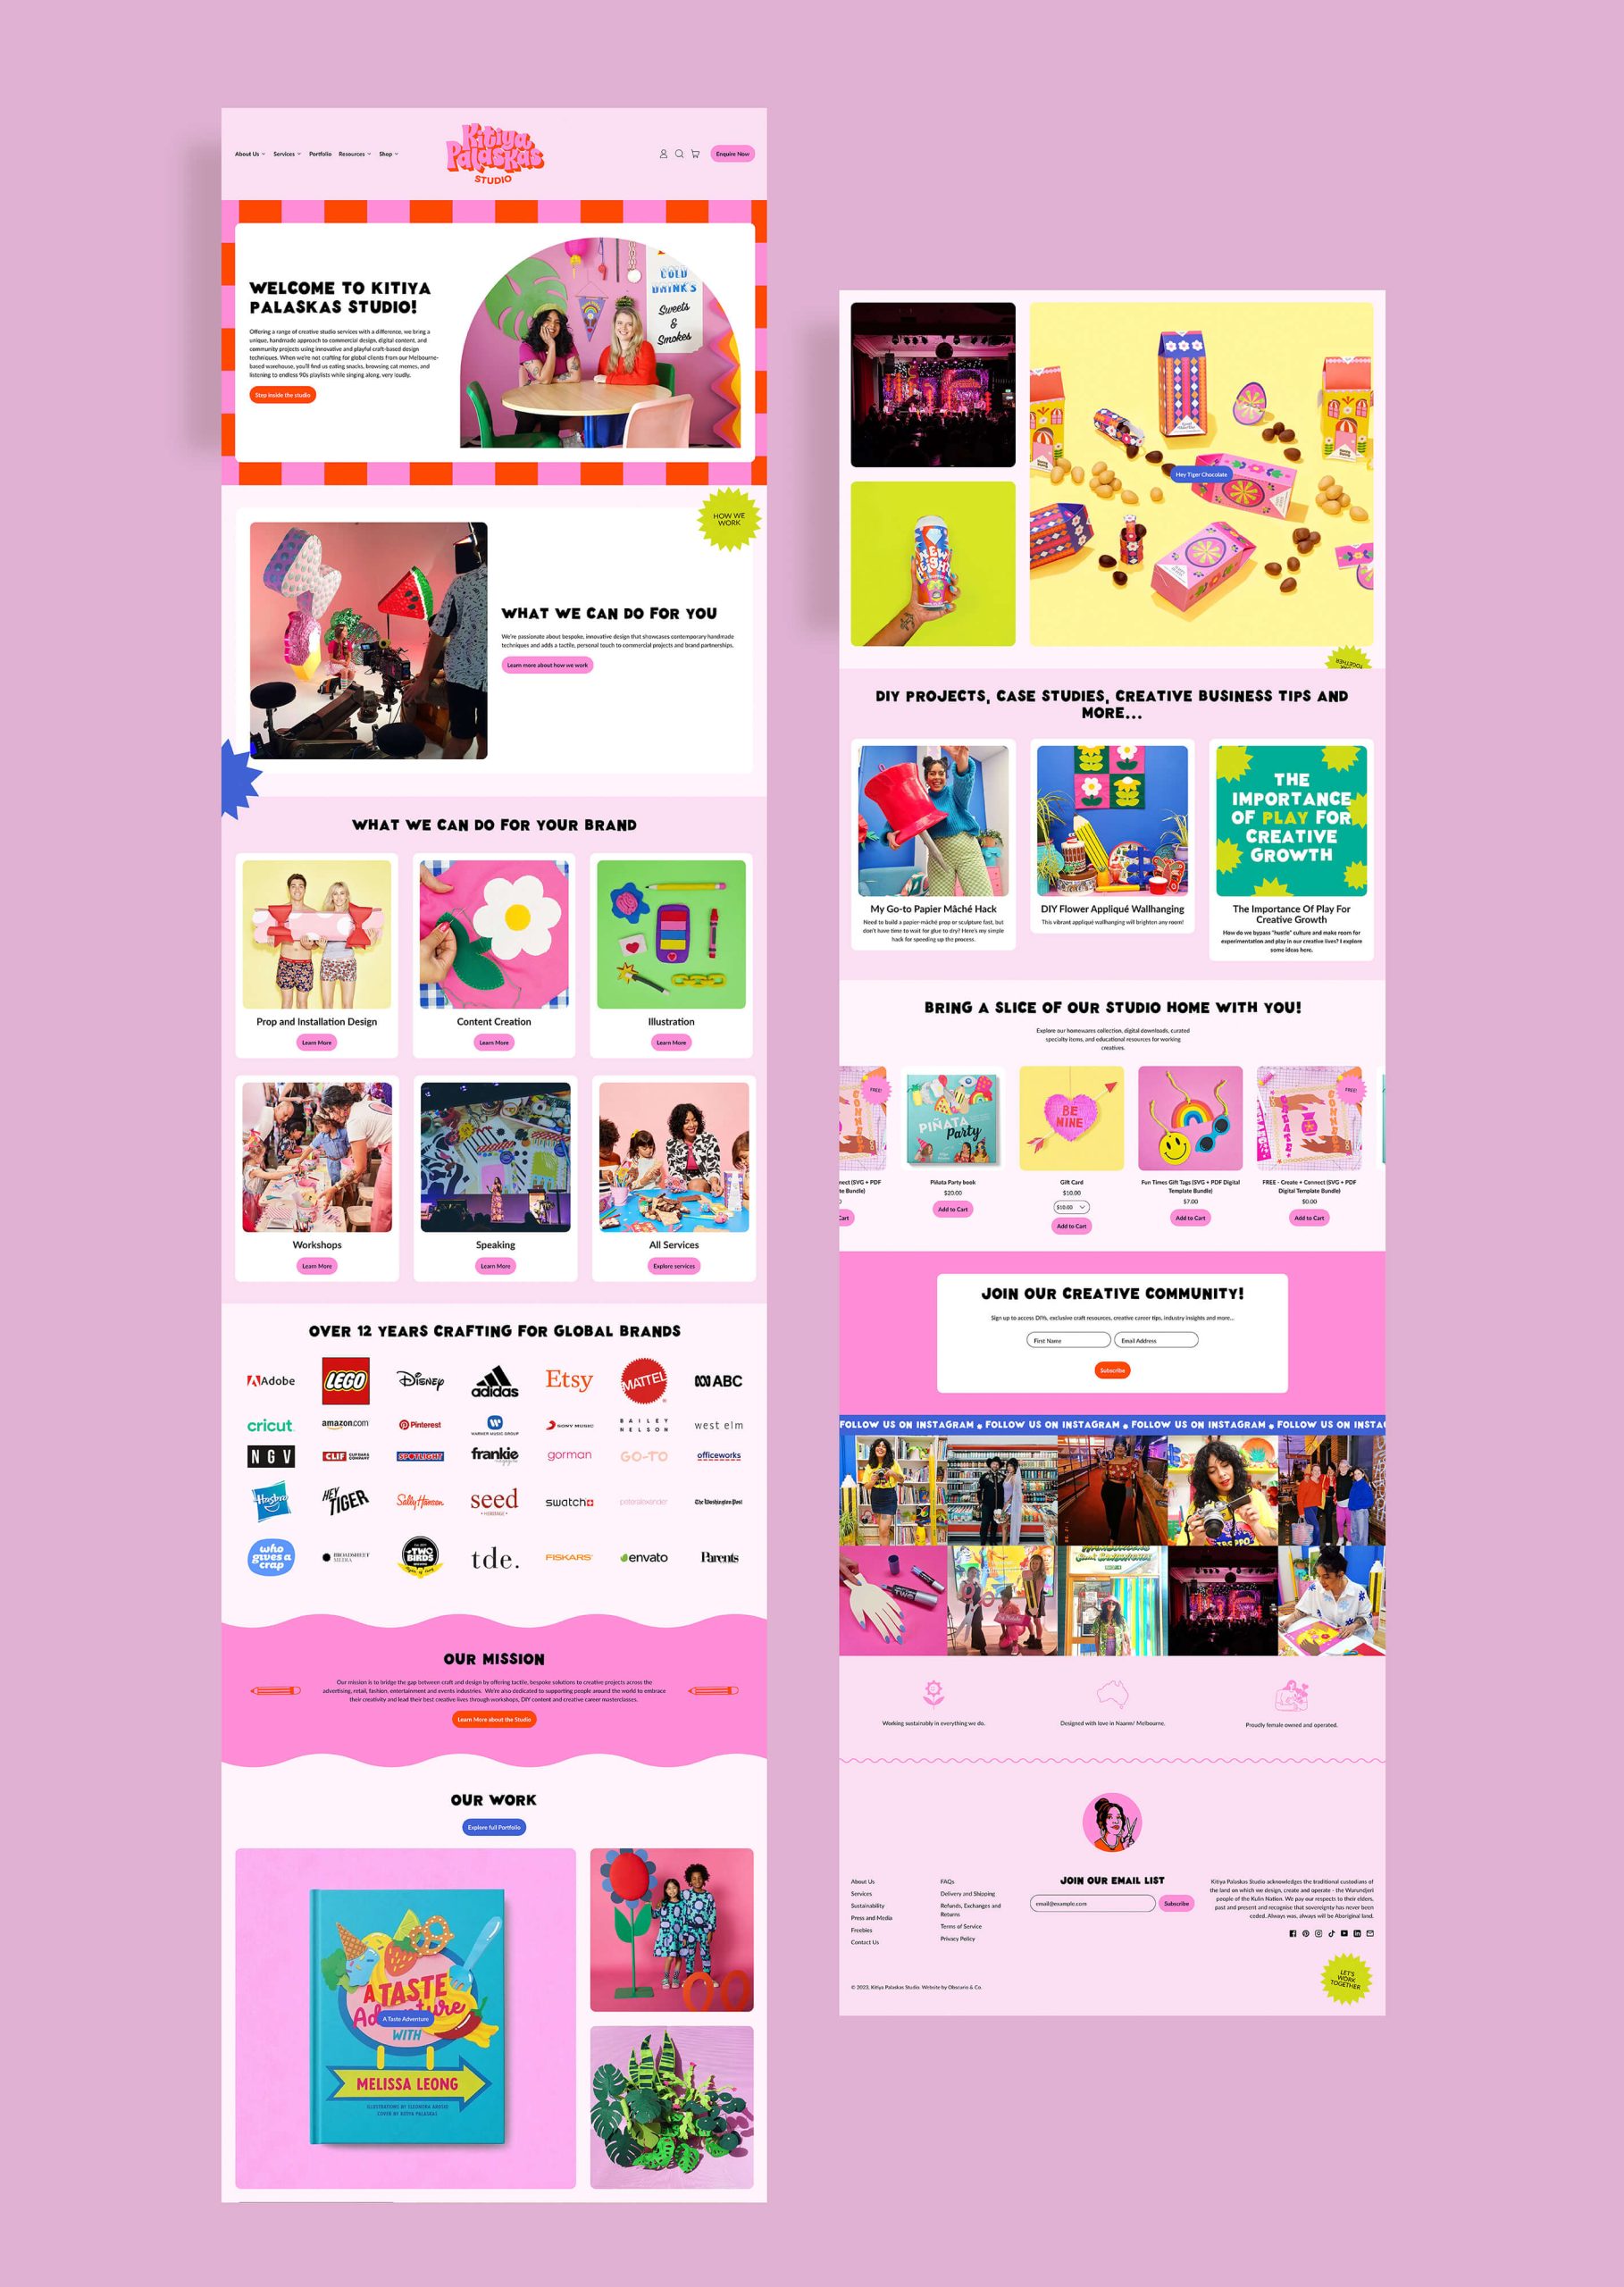 Brand identity case study image of Kitiya Palaskas’ homepage of their Shopify website. The layout features many sections and showcases the bright brand colours and consistent photographic style.